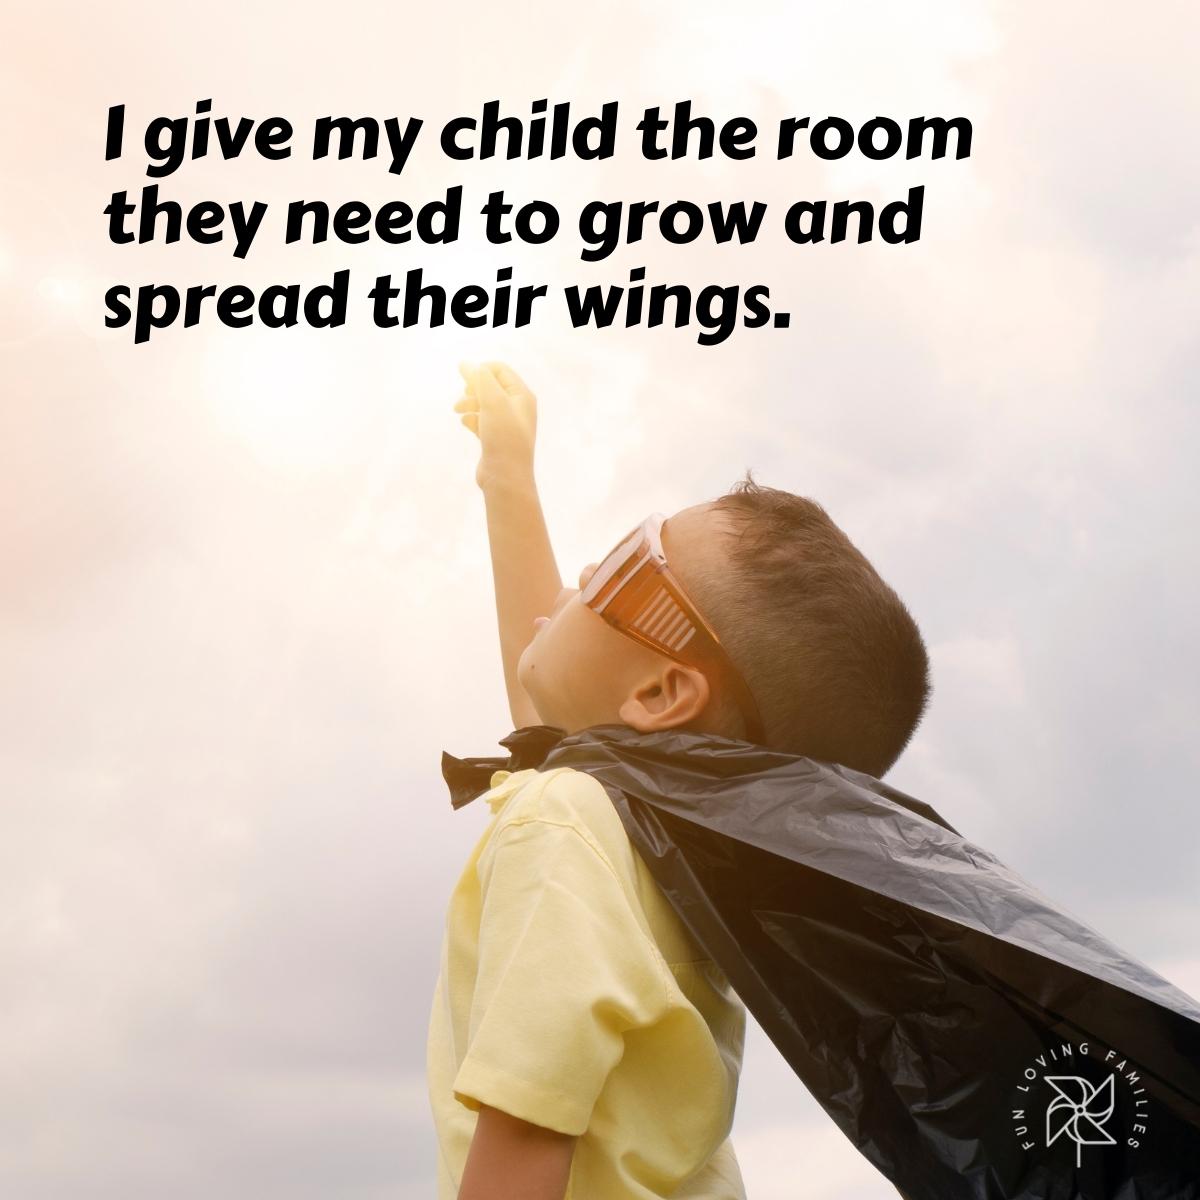 I give my child the room they need to grow affirmation